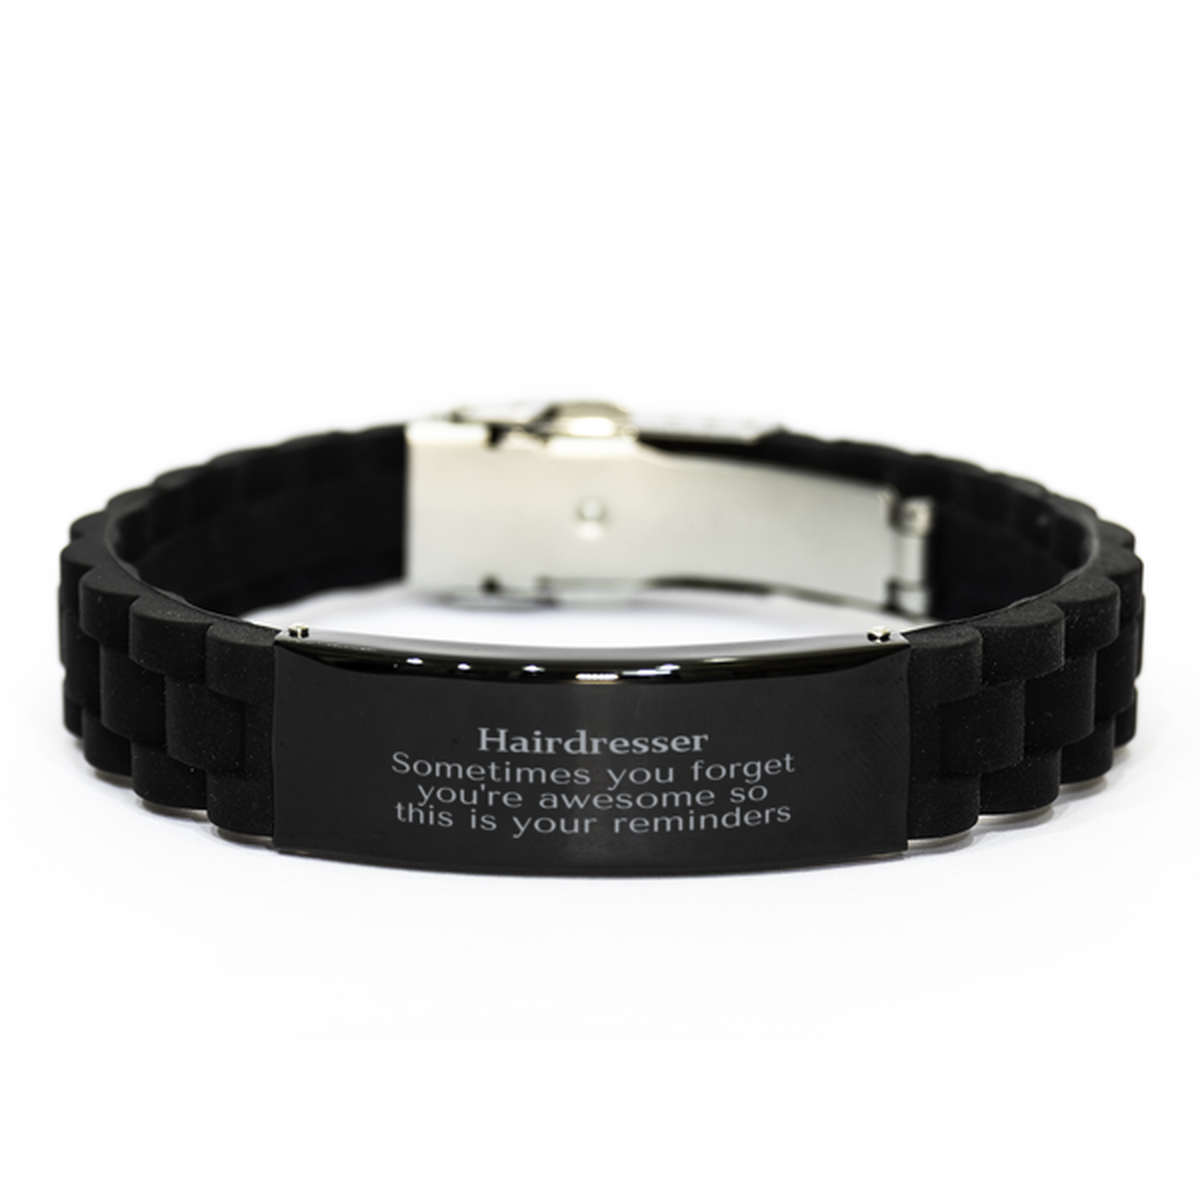 Sentimental Hairdresser Black Glidelock Clasp Bracelet, Hairdresser Sometimes you forget you're awesome so this is your reminders, Graduation Christmas Birthday Gifts for Hairdresser, Men, Women, Coworkers